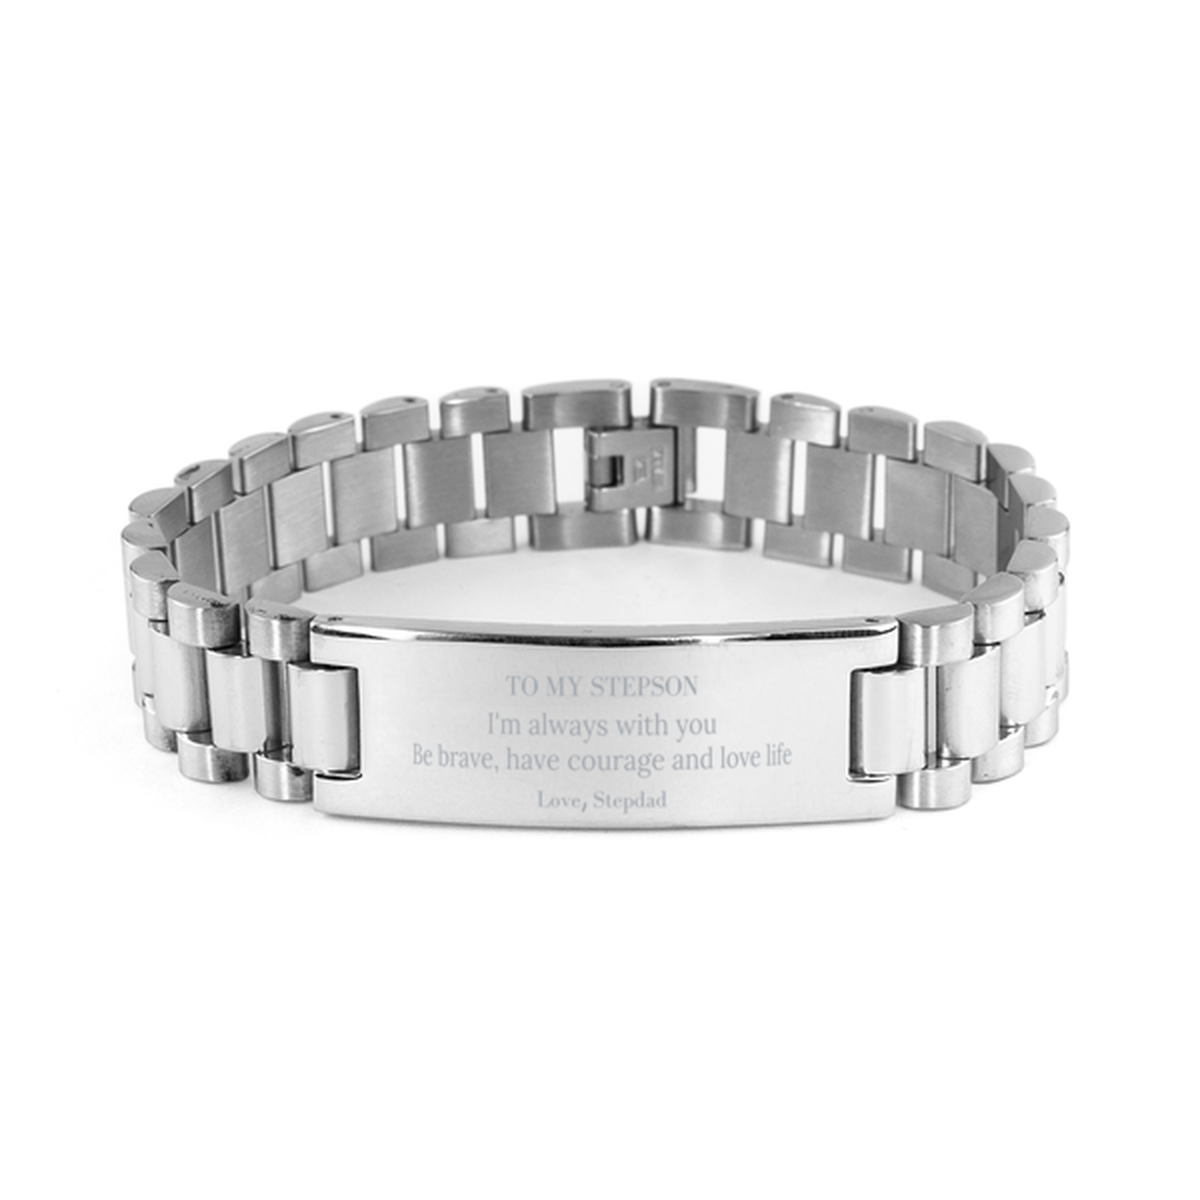 To My Stepson Gifts from Stepdad, Unique Ladder Stainless Steel Bracelet Inspirational Christmas Birthday Graduation Gifts for Stepson I'm always with you. Be brave, have courage and love life. Love, Stepdad